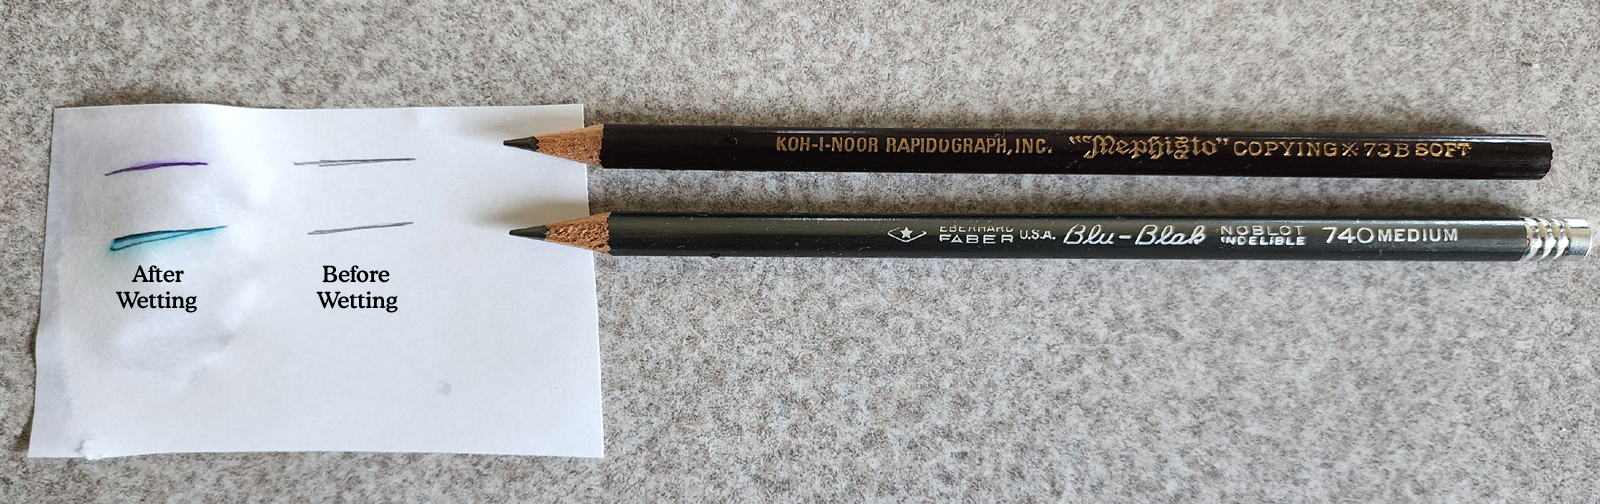 examples of indelible pencils that change from gray to another color when wet